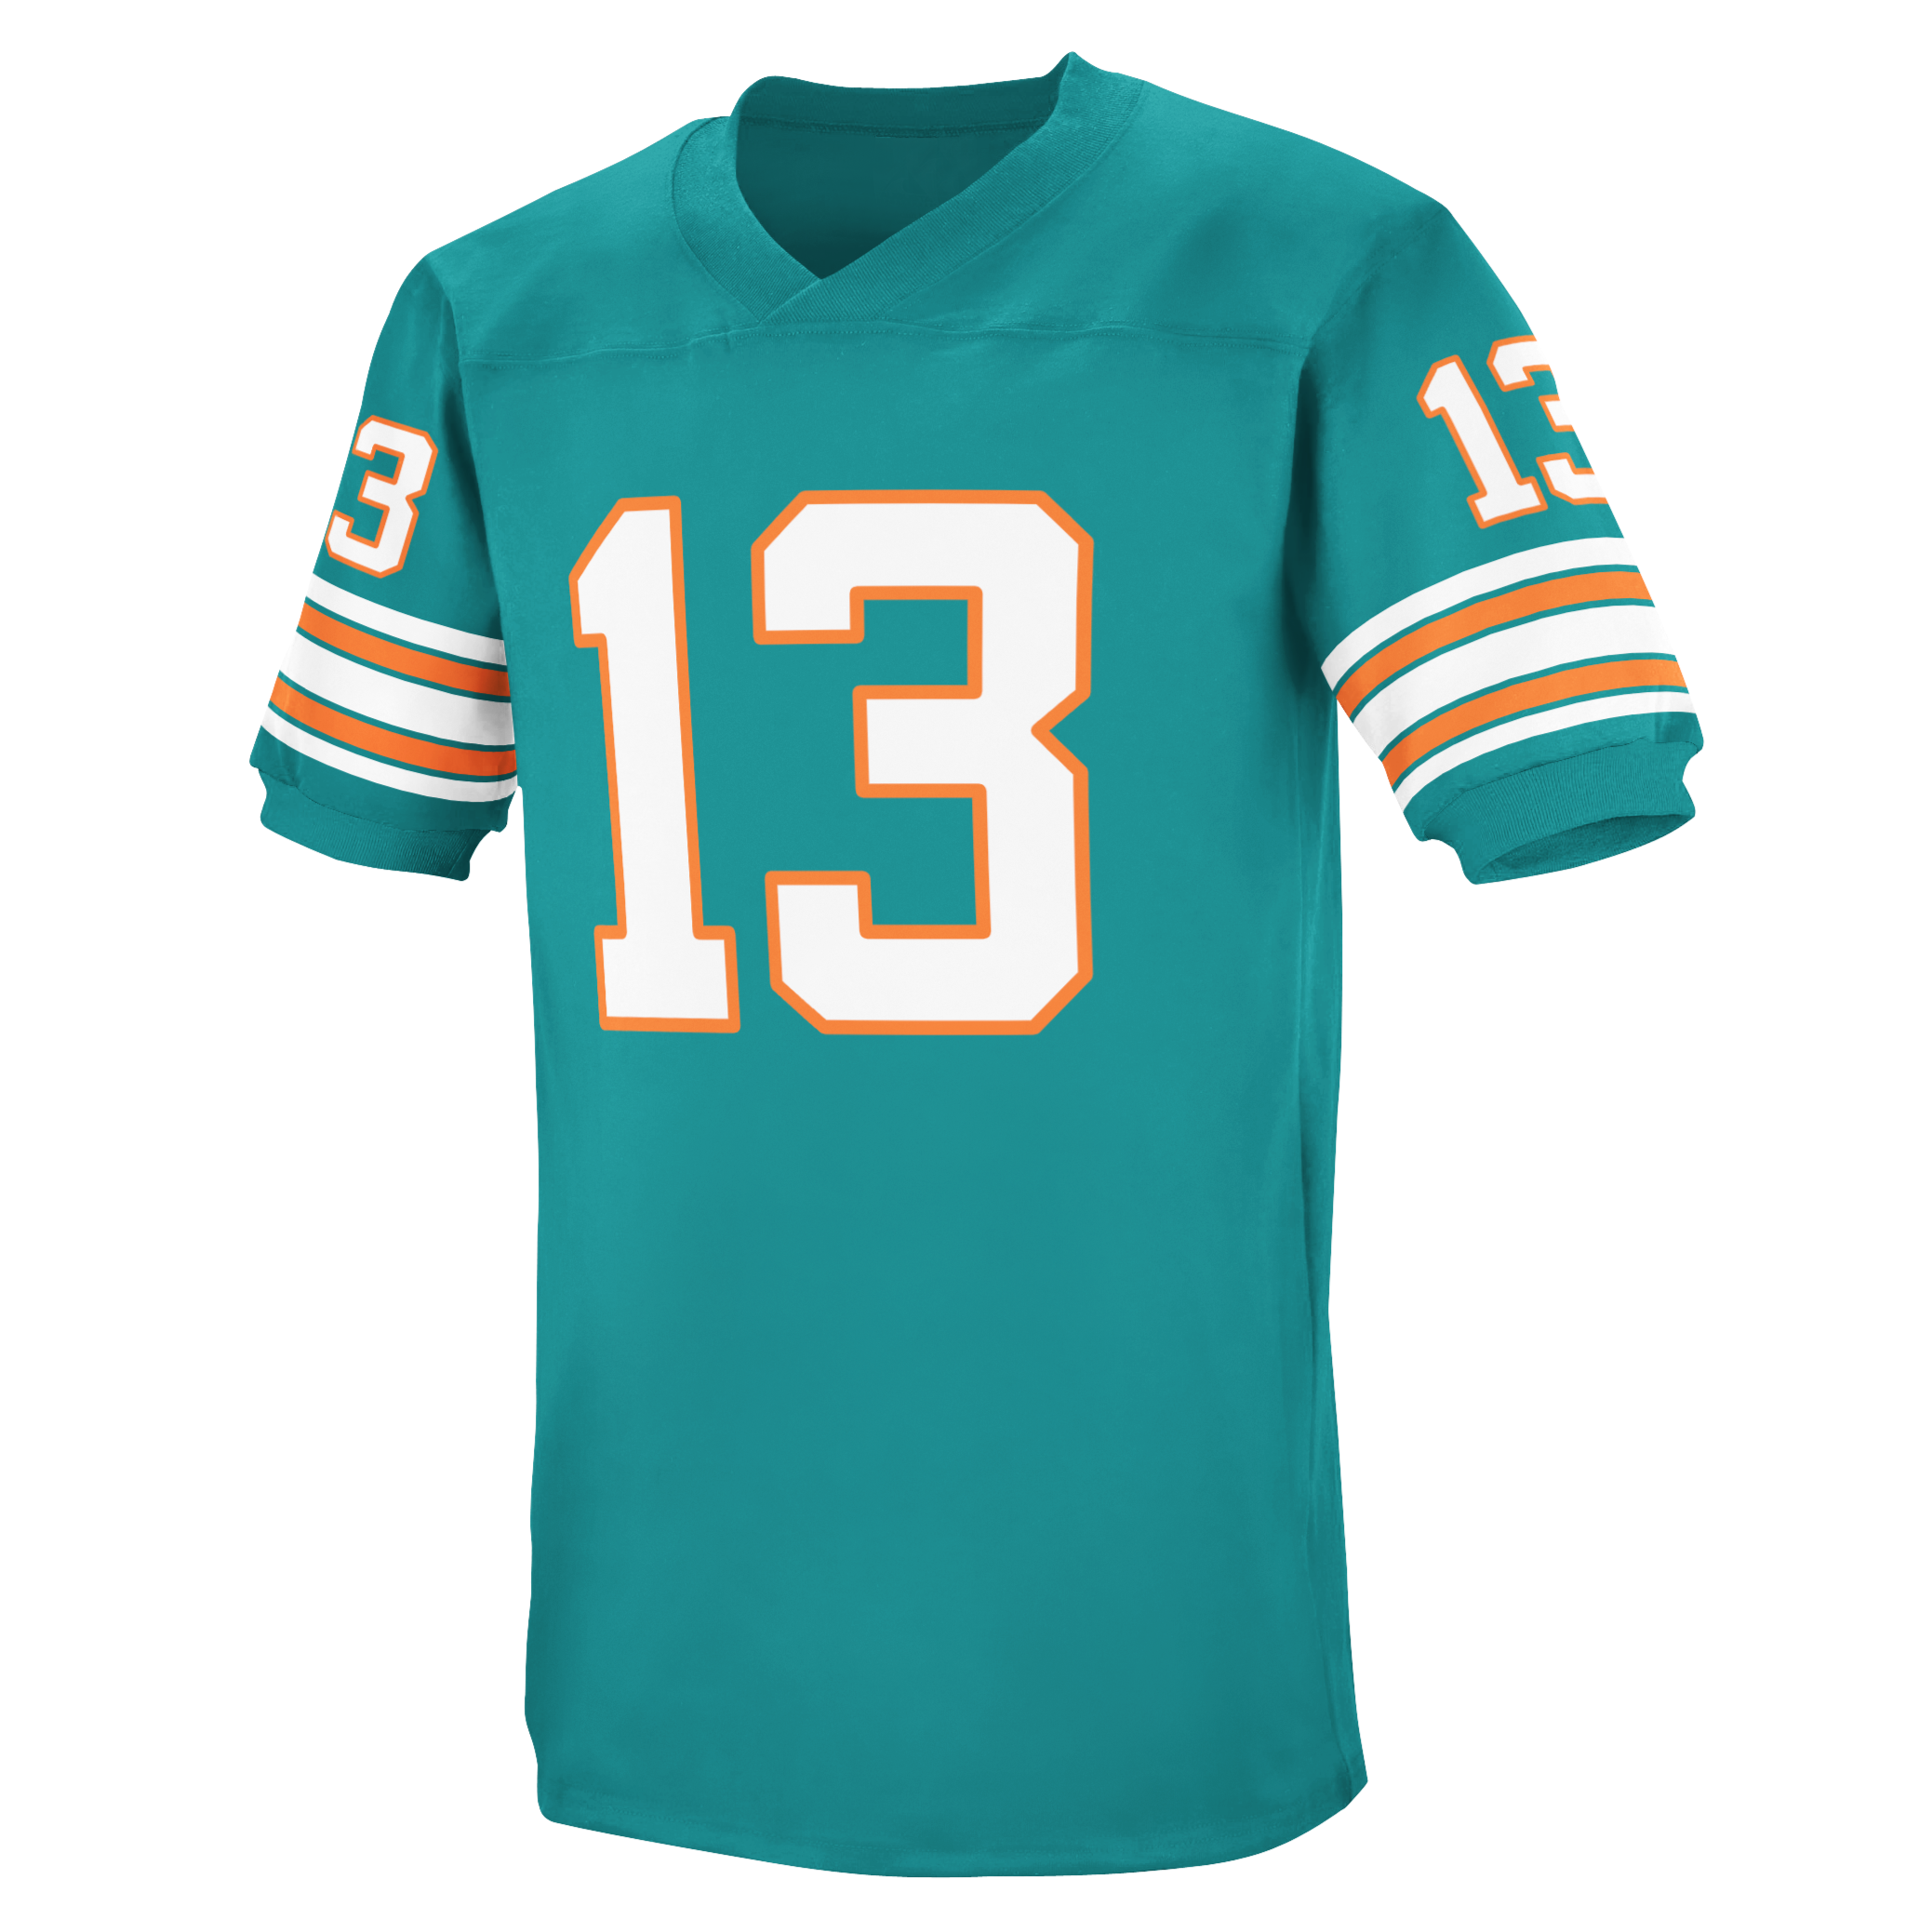 Undefeated Football Jersey